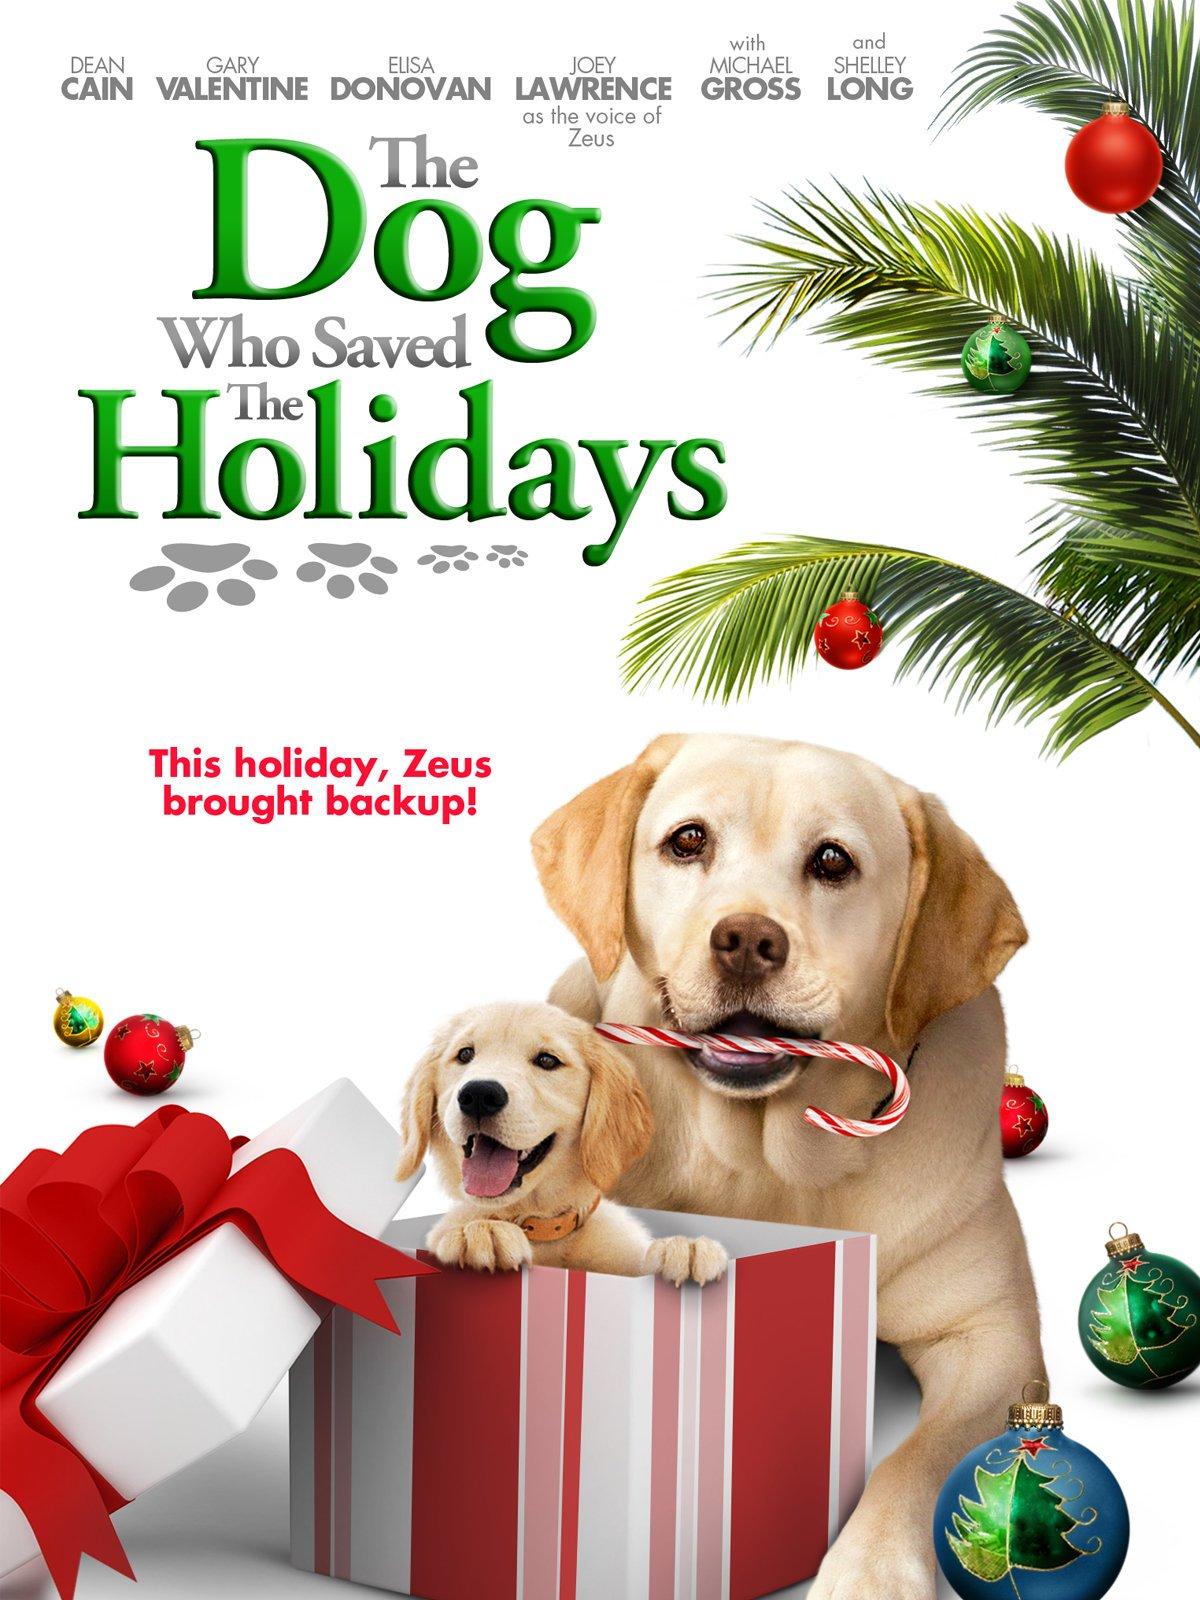 The Dog Who Saved the Holidays: Dean Cain